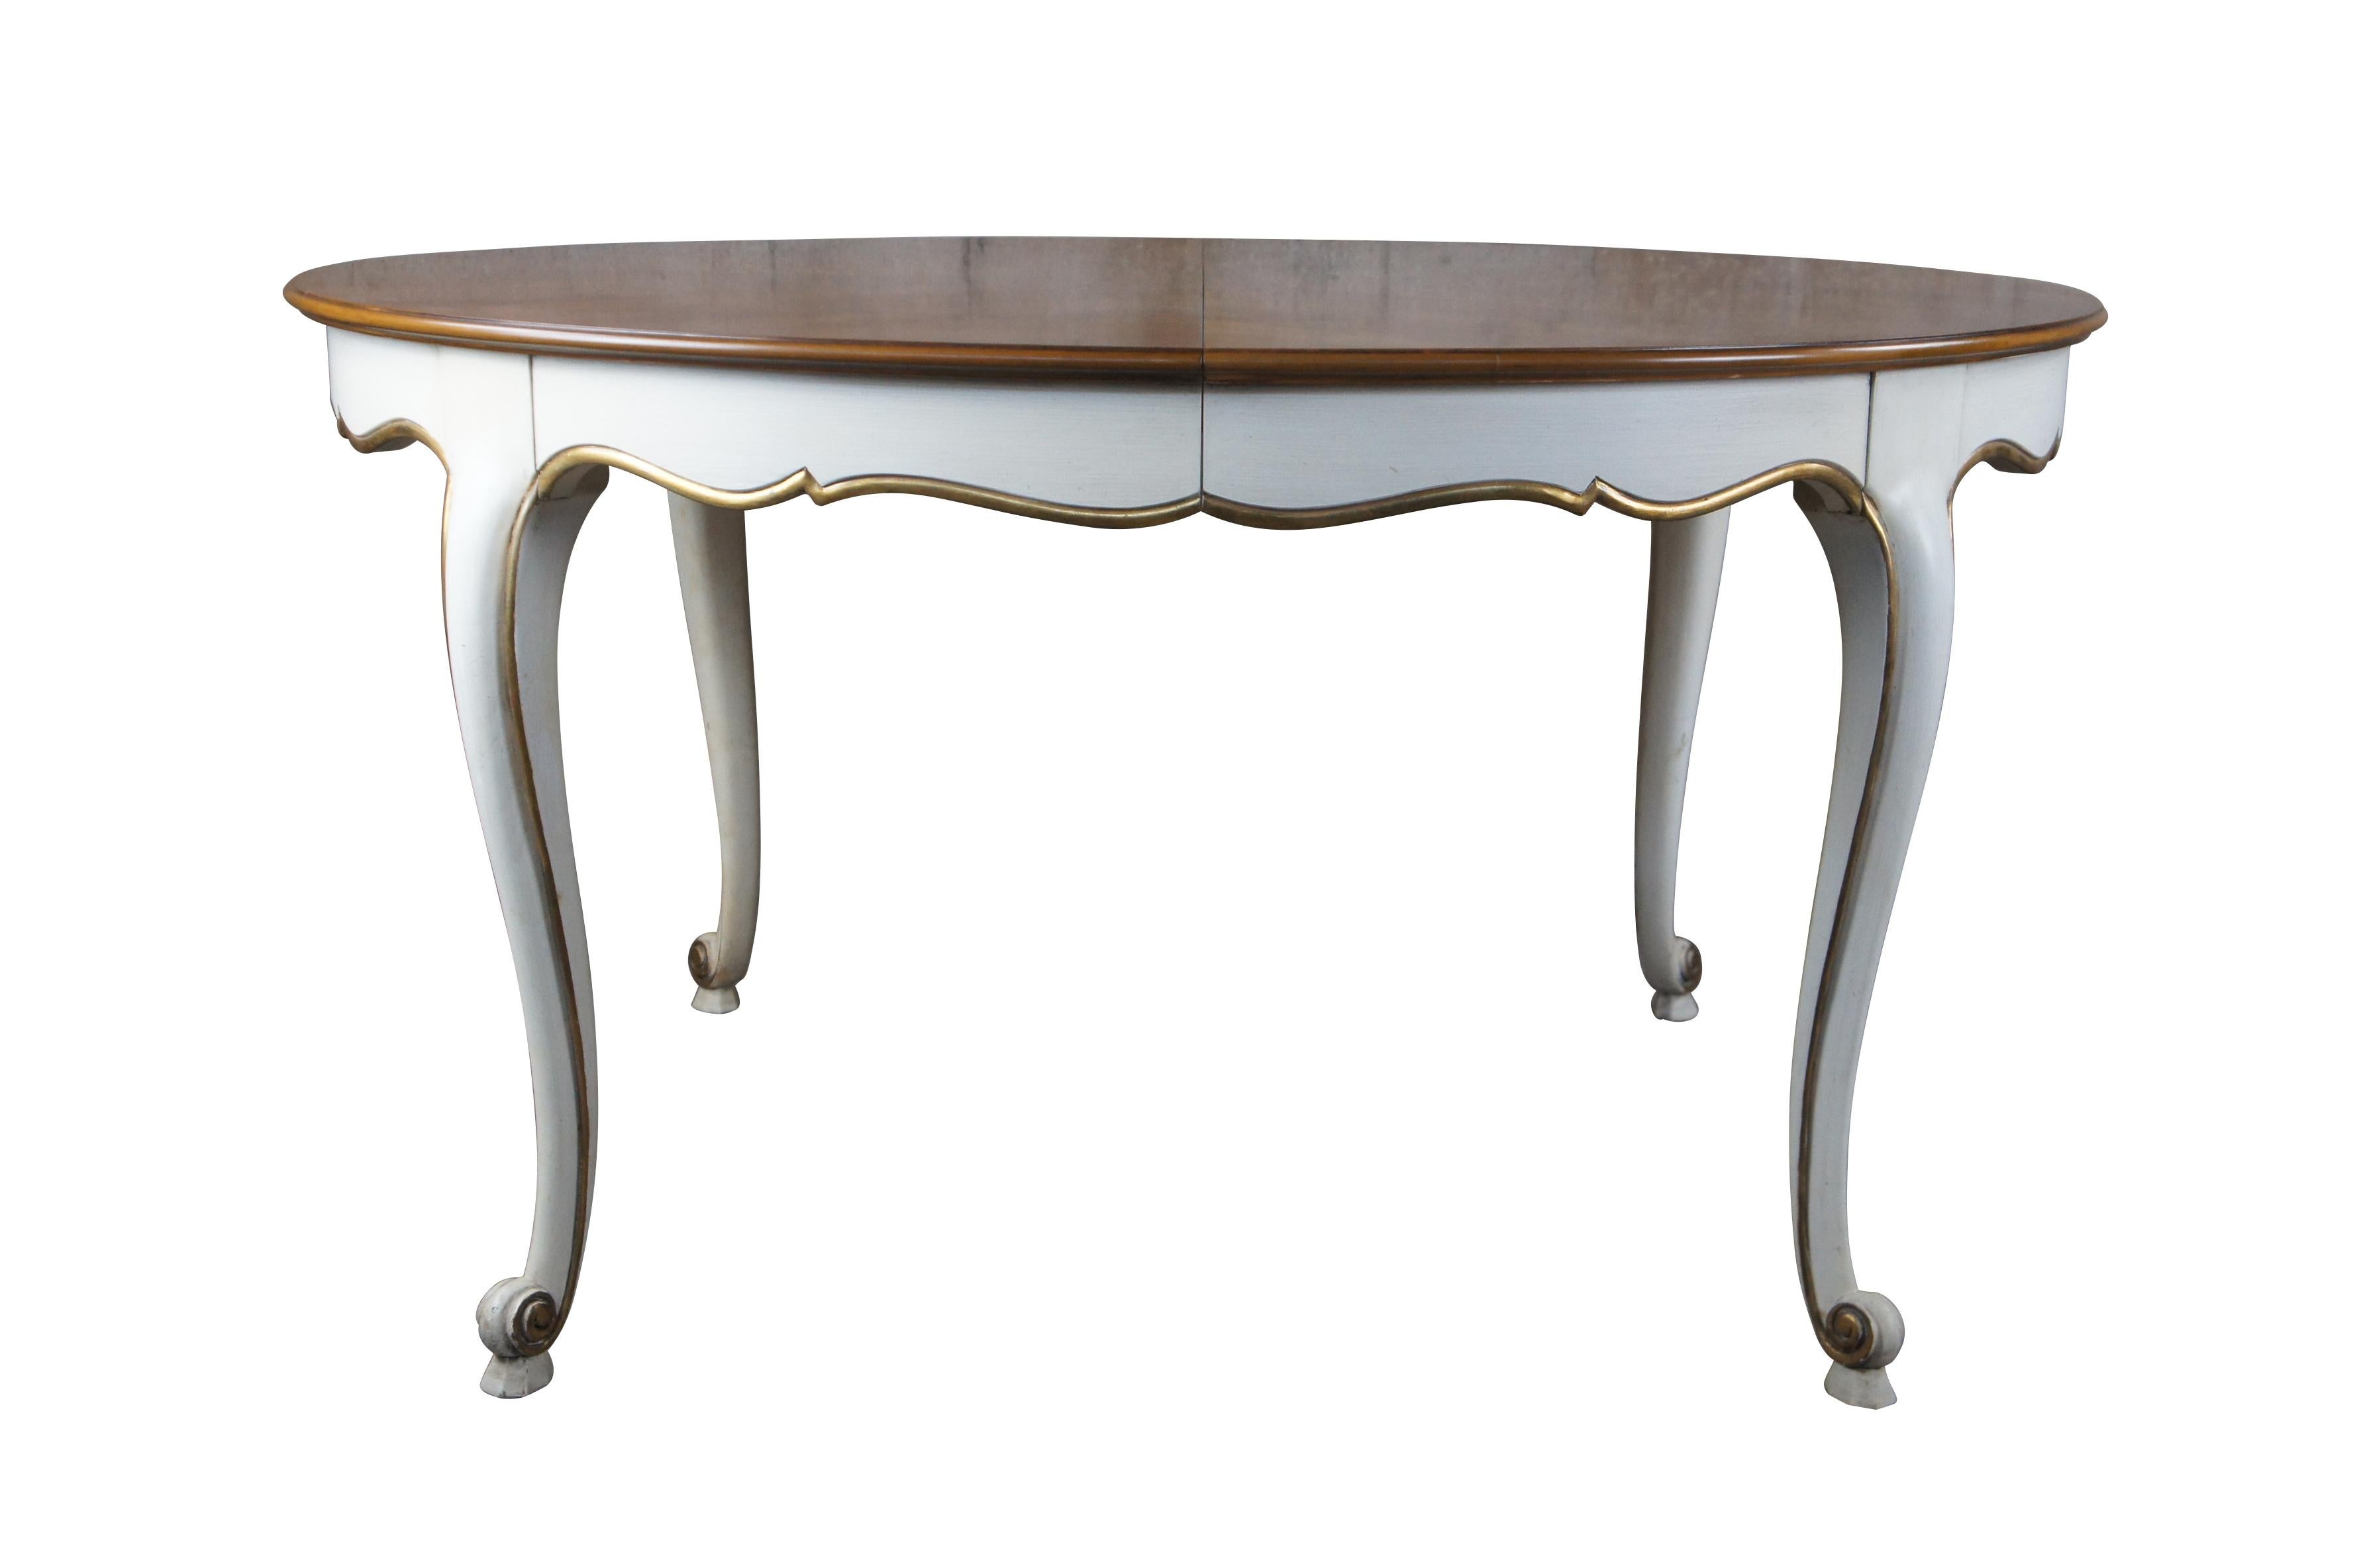 Vintage Kindel Furniture Belvedere Collection extendable dining table.  Made of Cherry featuring oval form with scalloped skirt and cabriole legs painted white with gold accents.  Includes three leaves.

Kindel Grand Rapids has maintained family